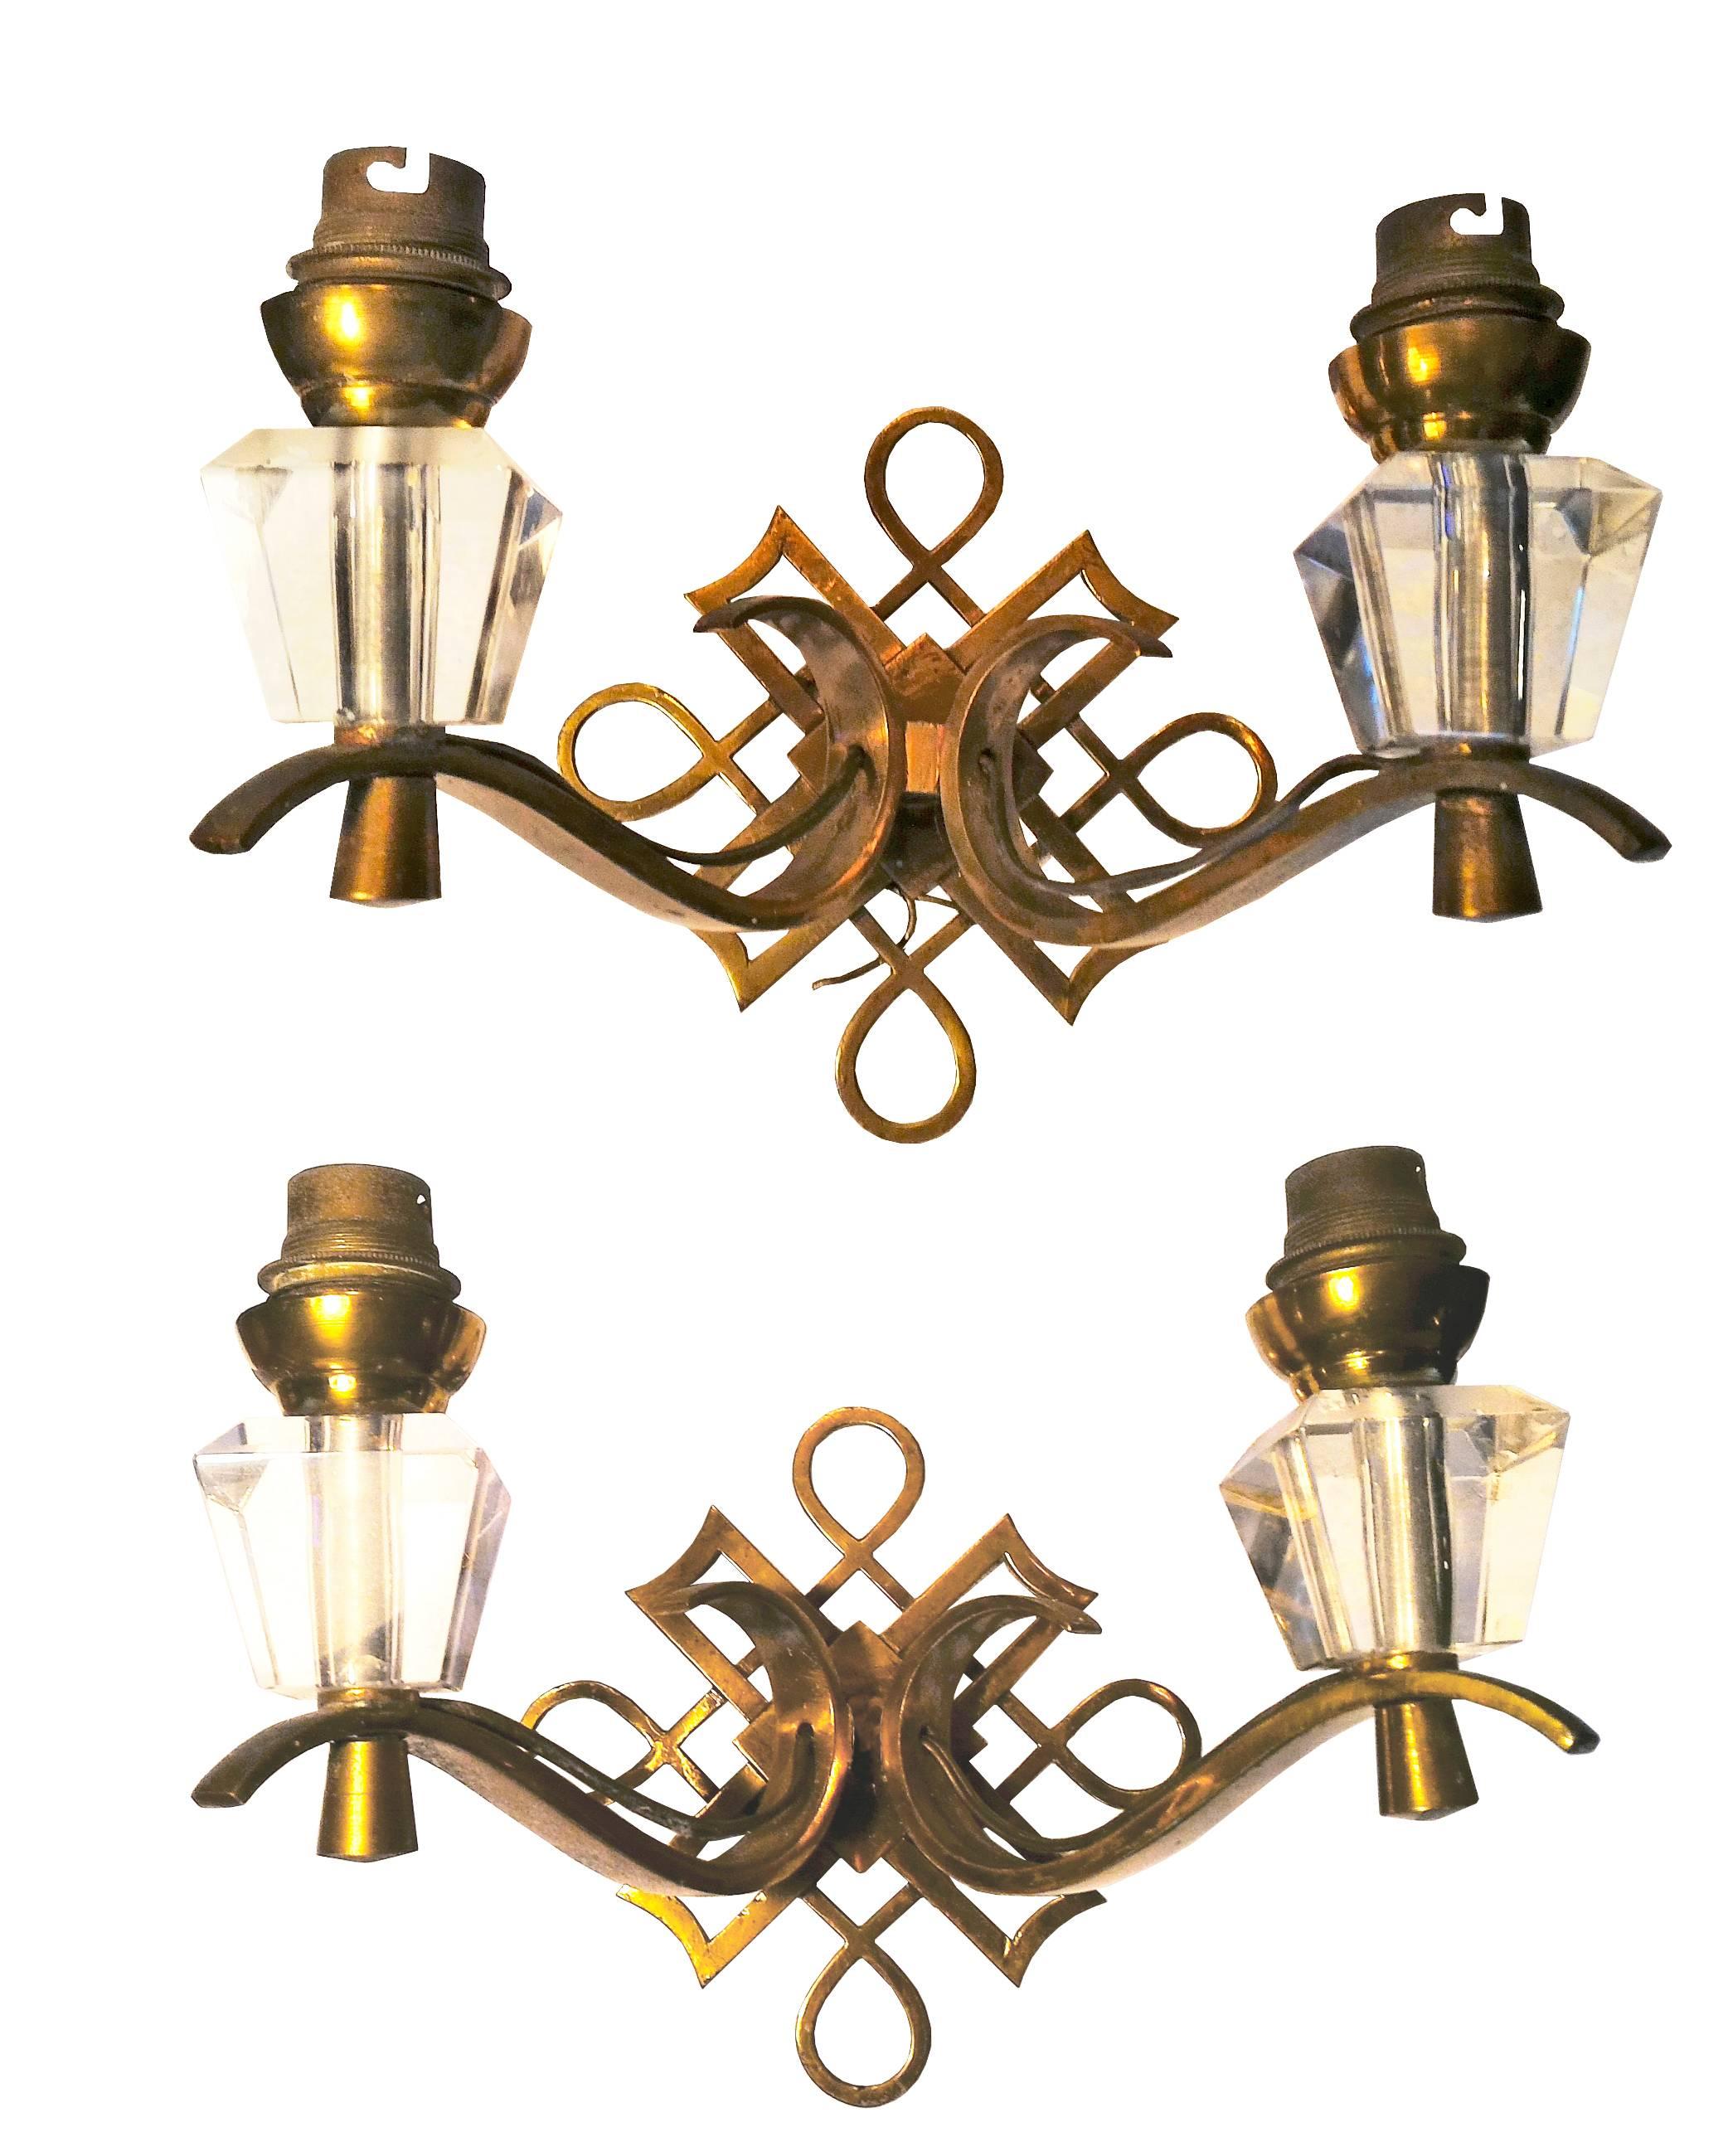 Two pairs of French neoclassical, sophisticated Jules Leleu French Mid-Century Modern sconces "chandelier" double sconces /appliques, attributed to Jules Leleu (sold By Christie's).
Made in gilt bronze and translucent cut-glass with very